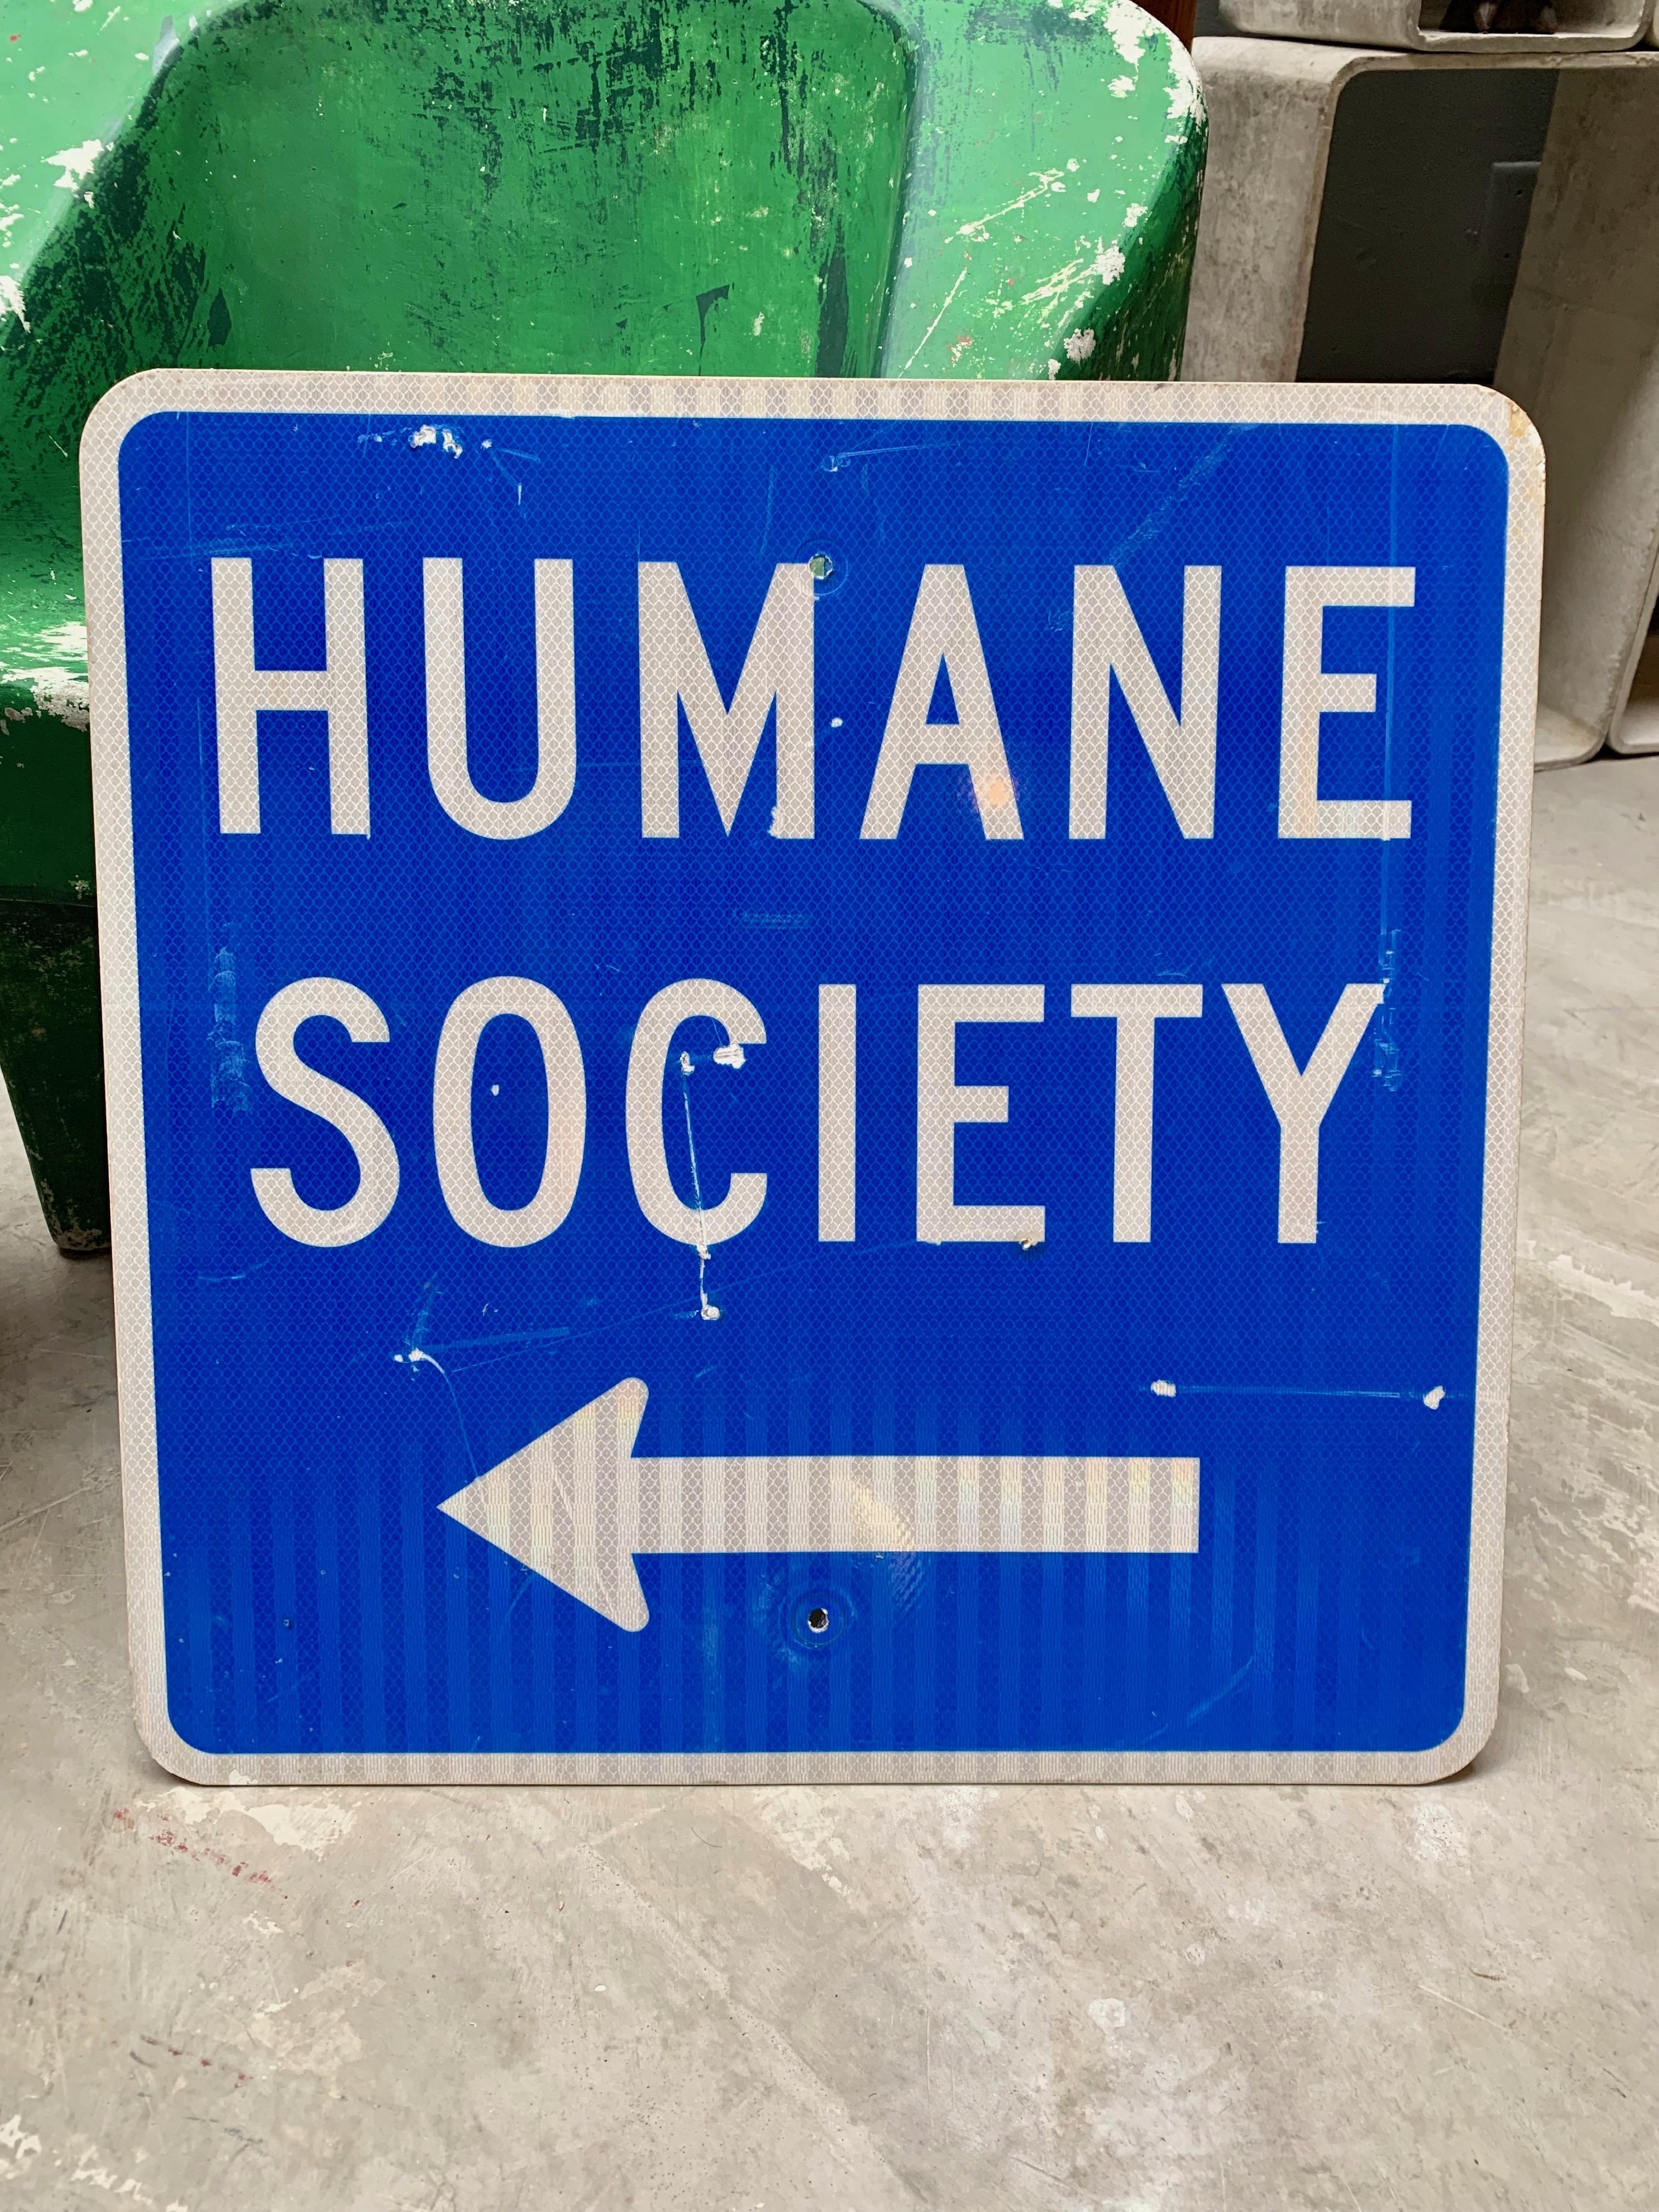 Rare vintage steel road sign for the Humane Society. Great for animal lovers. Blue reflective sign with white lettering 